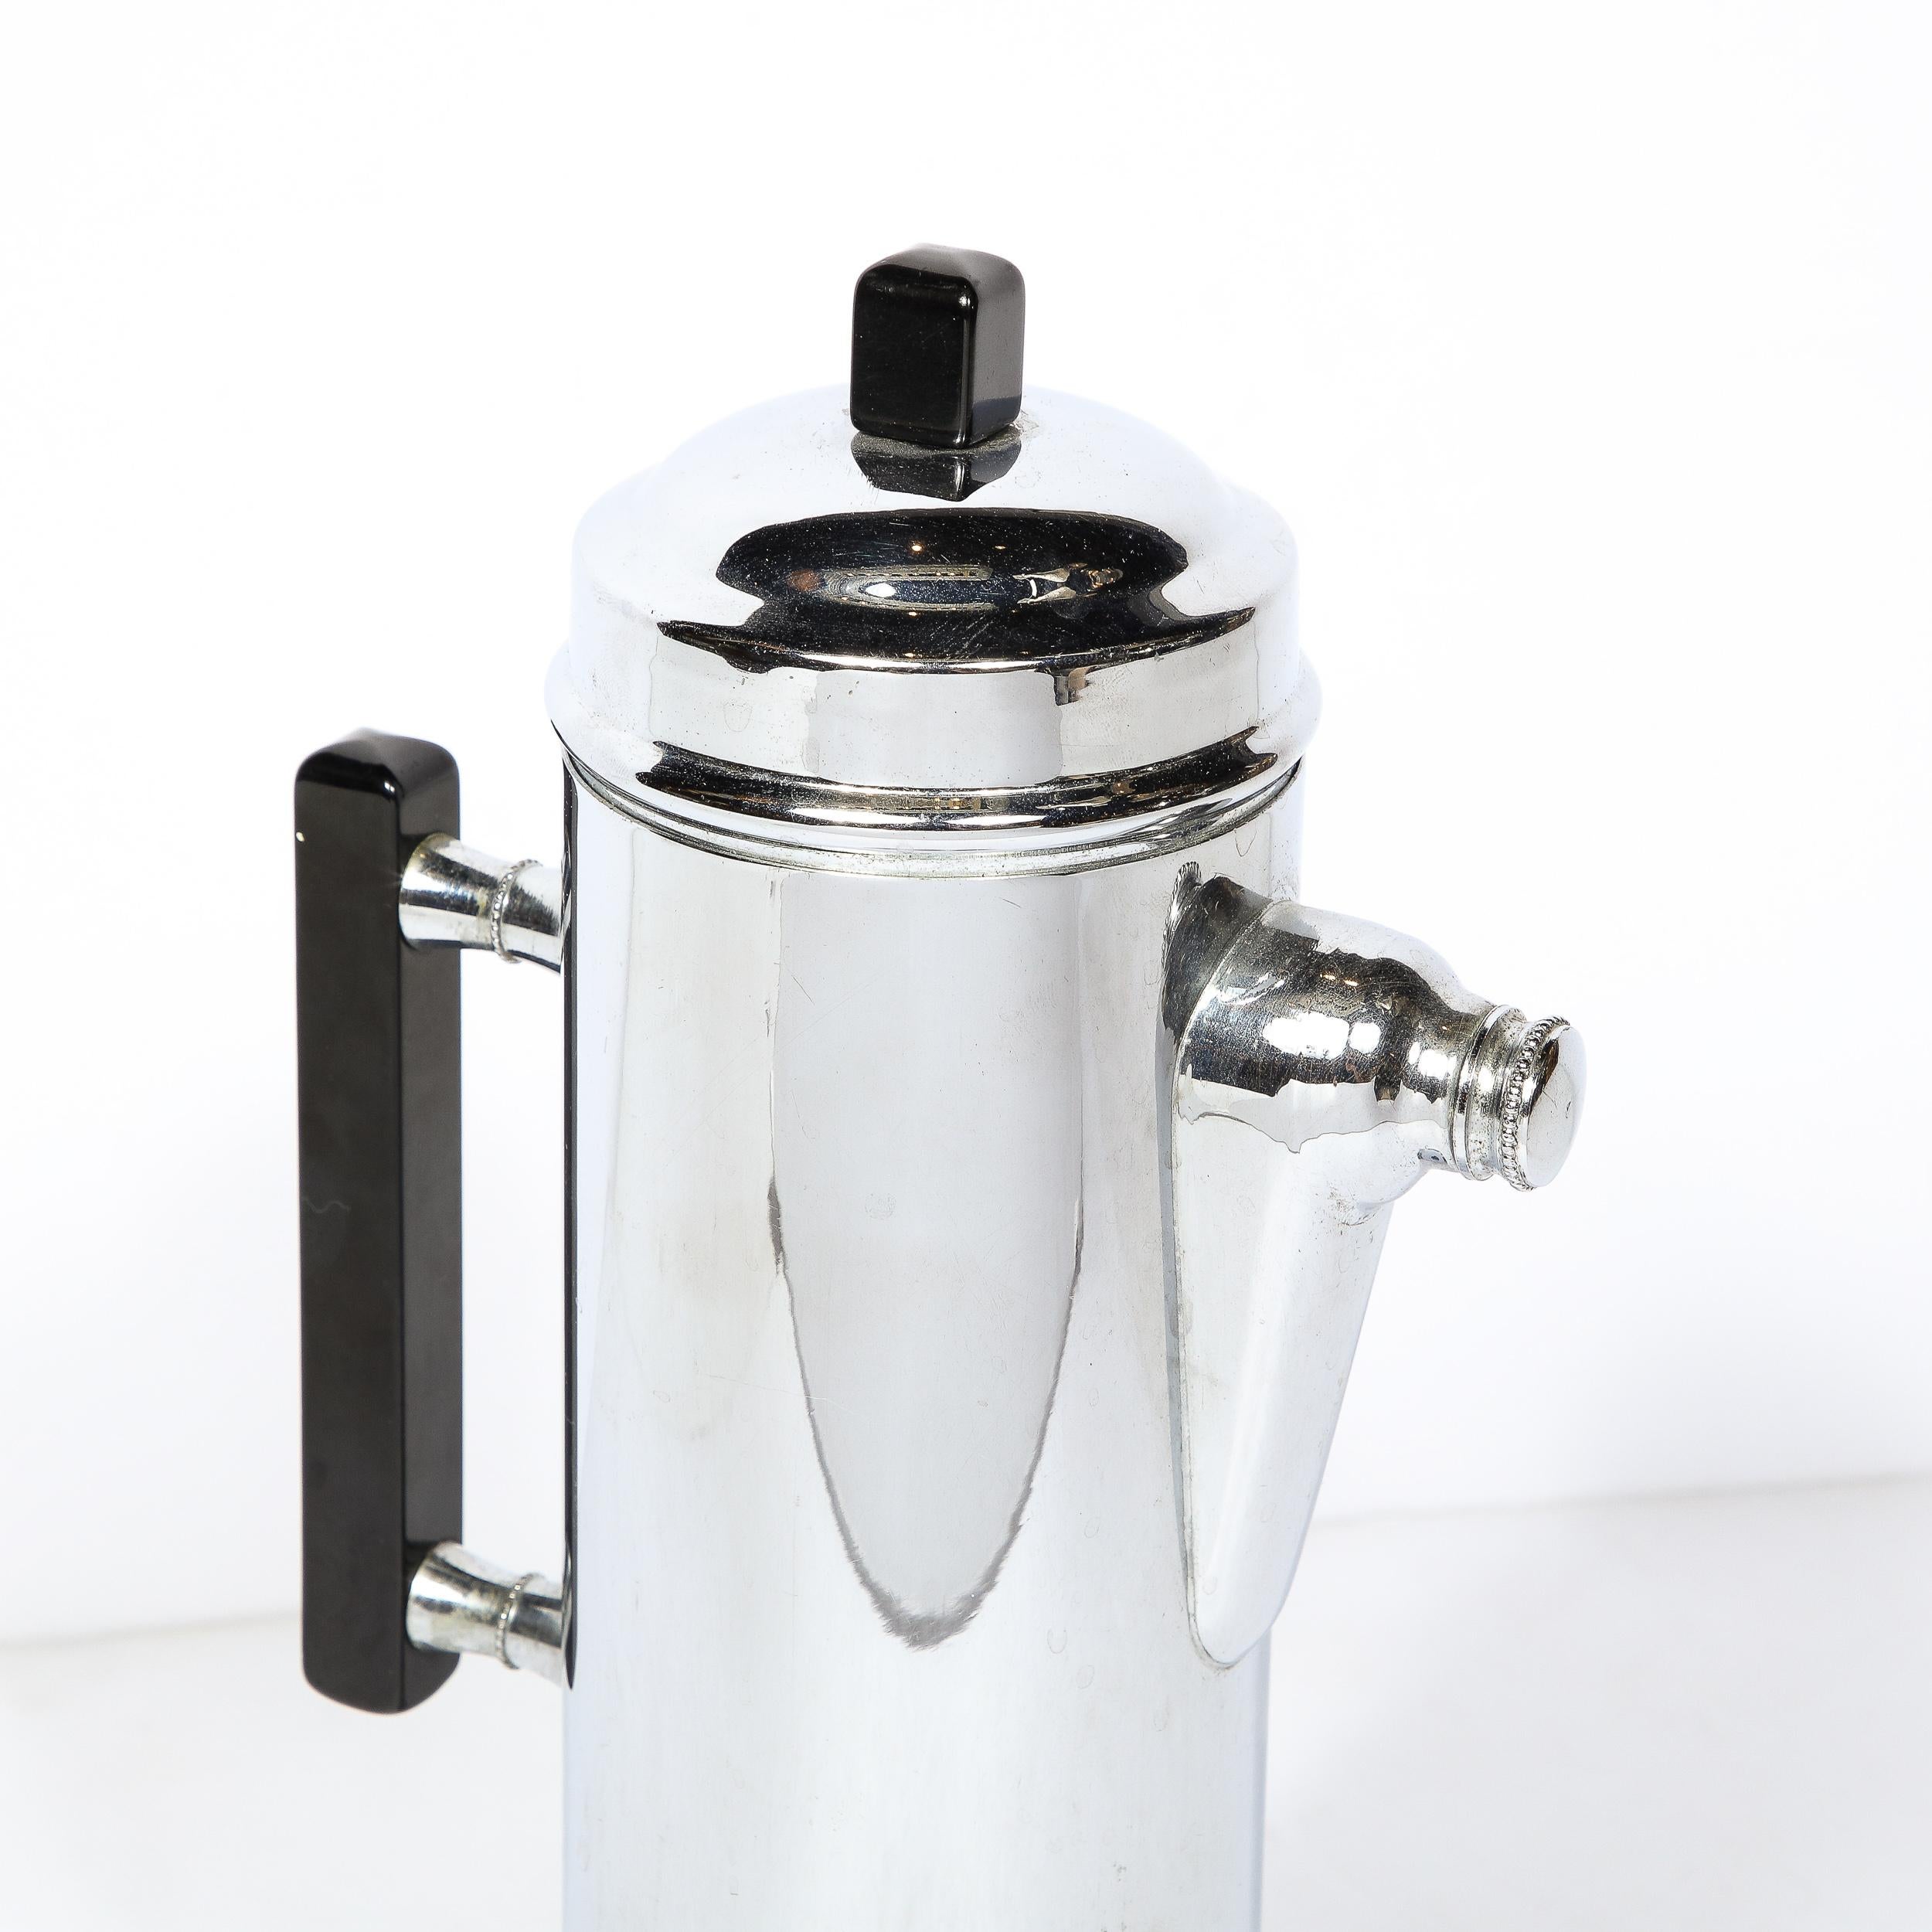 Mid-20th Century Art Deco Streamlined Cocktail Shaker in Chrome with Black Bakelite Handles For Sale